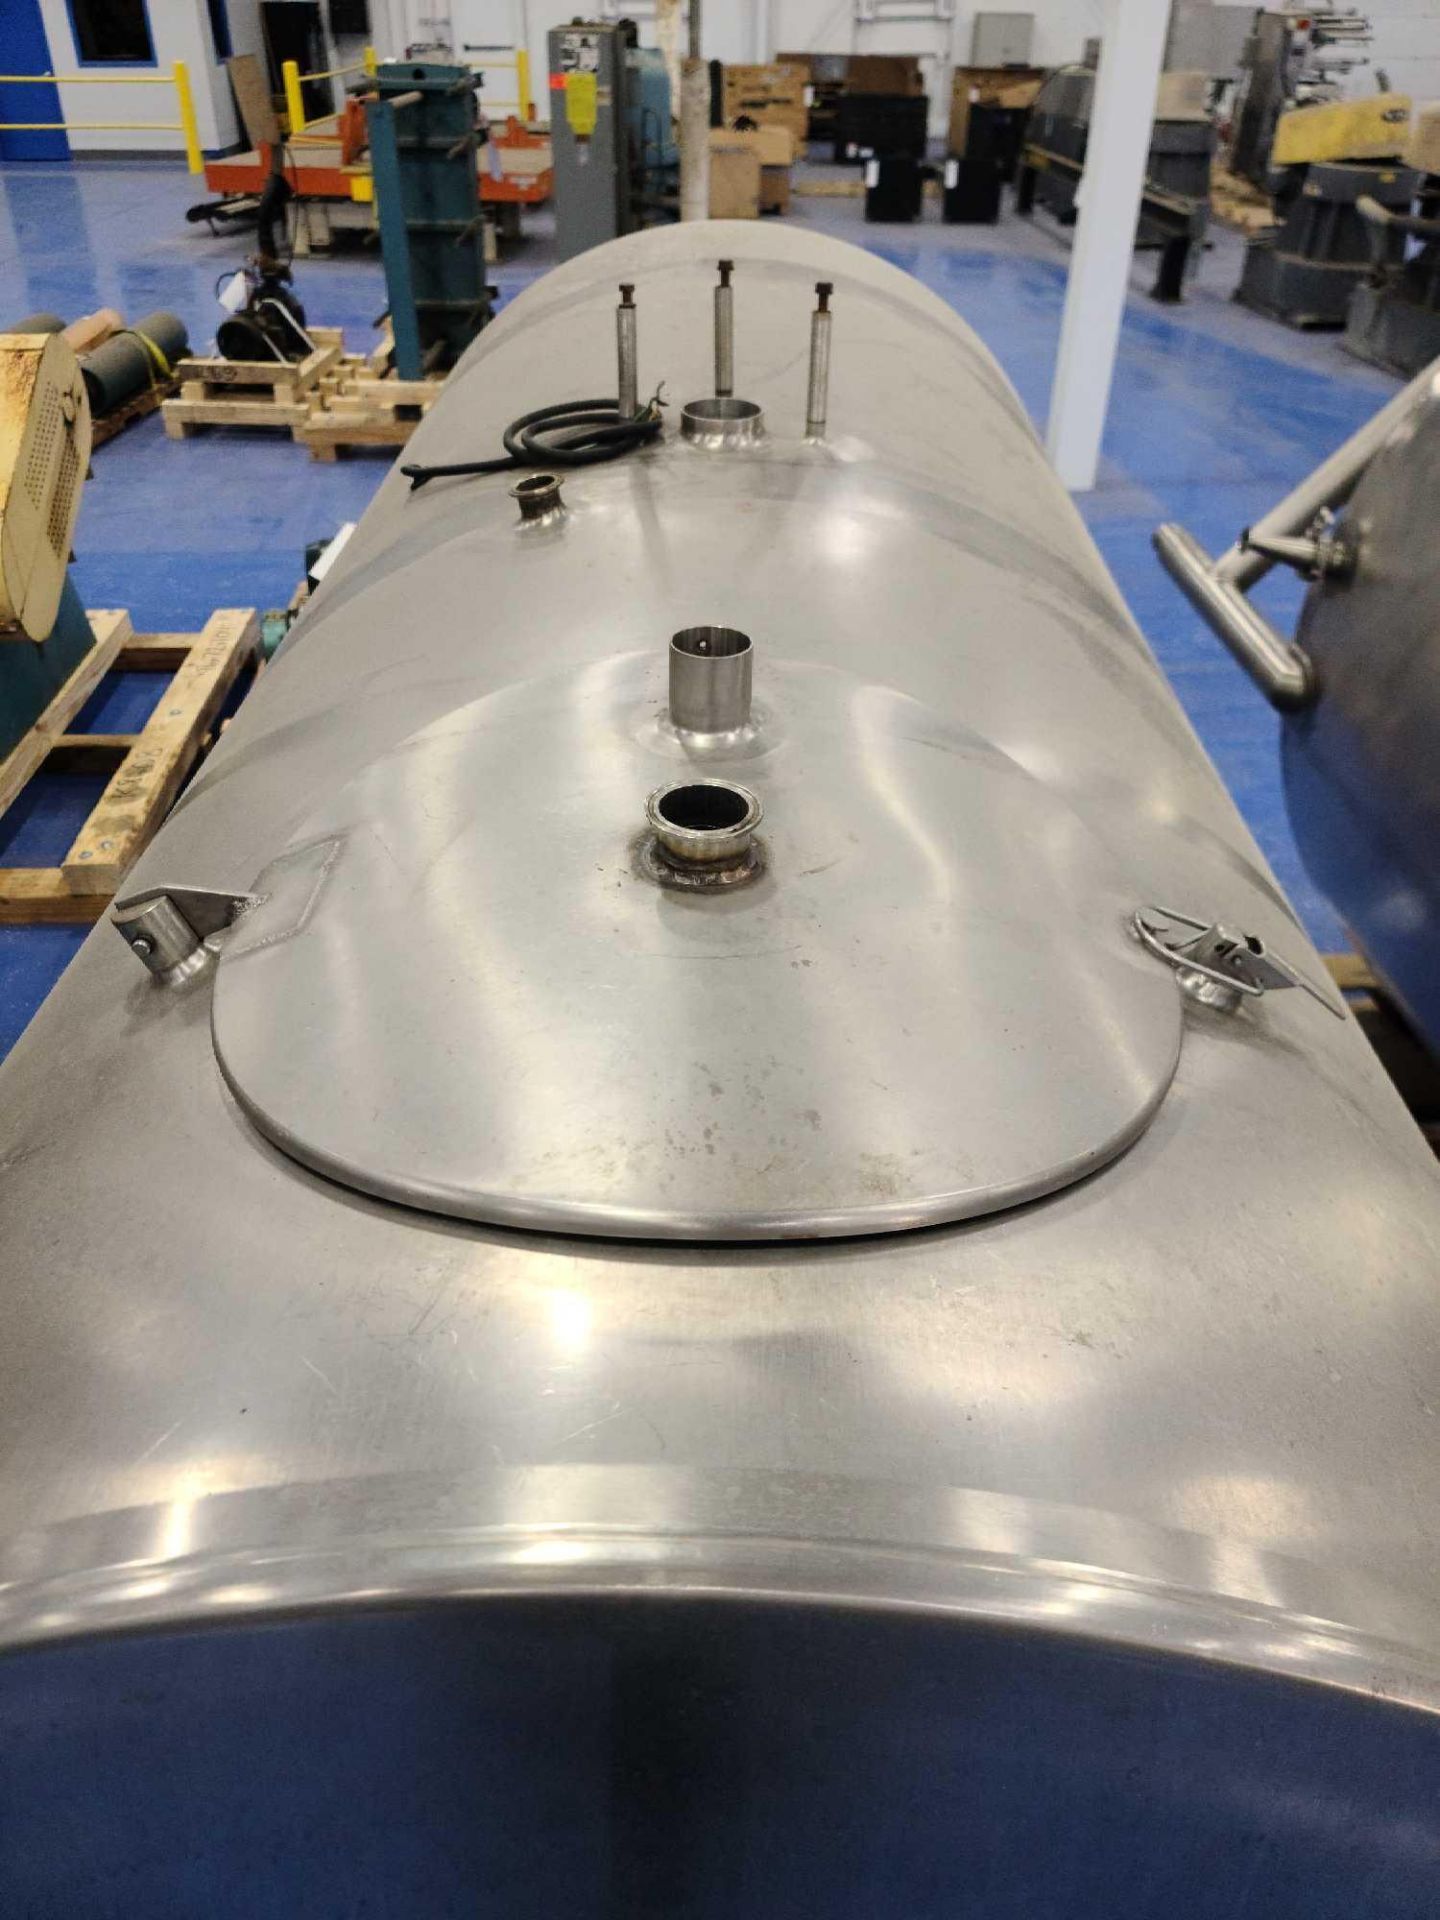 Sunset SC 600 Gallon Stainless Steel Insulated Horizontal Tank - Image 4 of 8